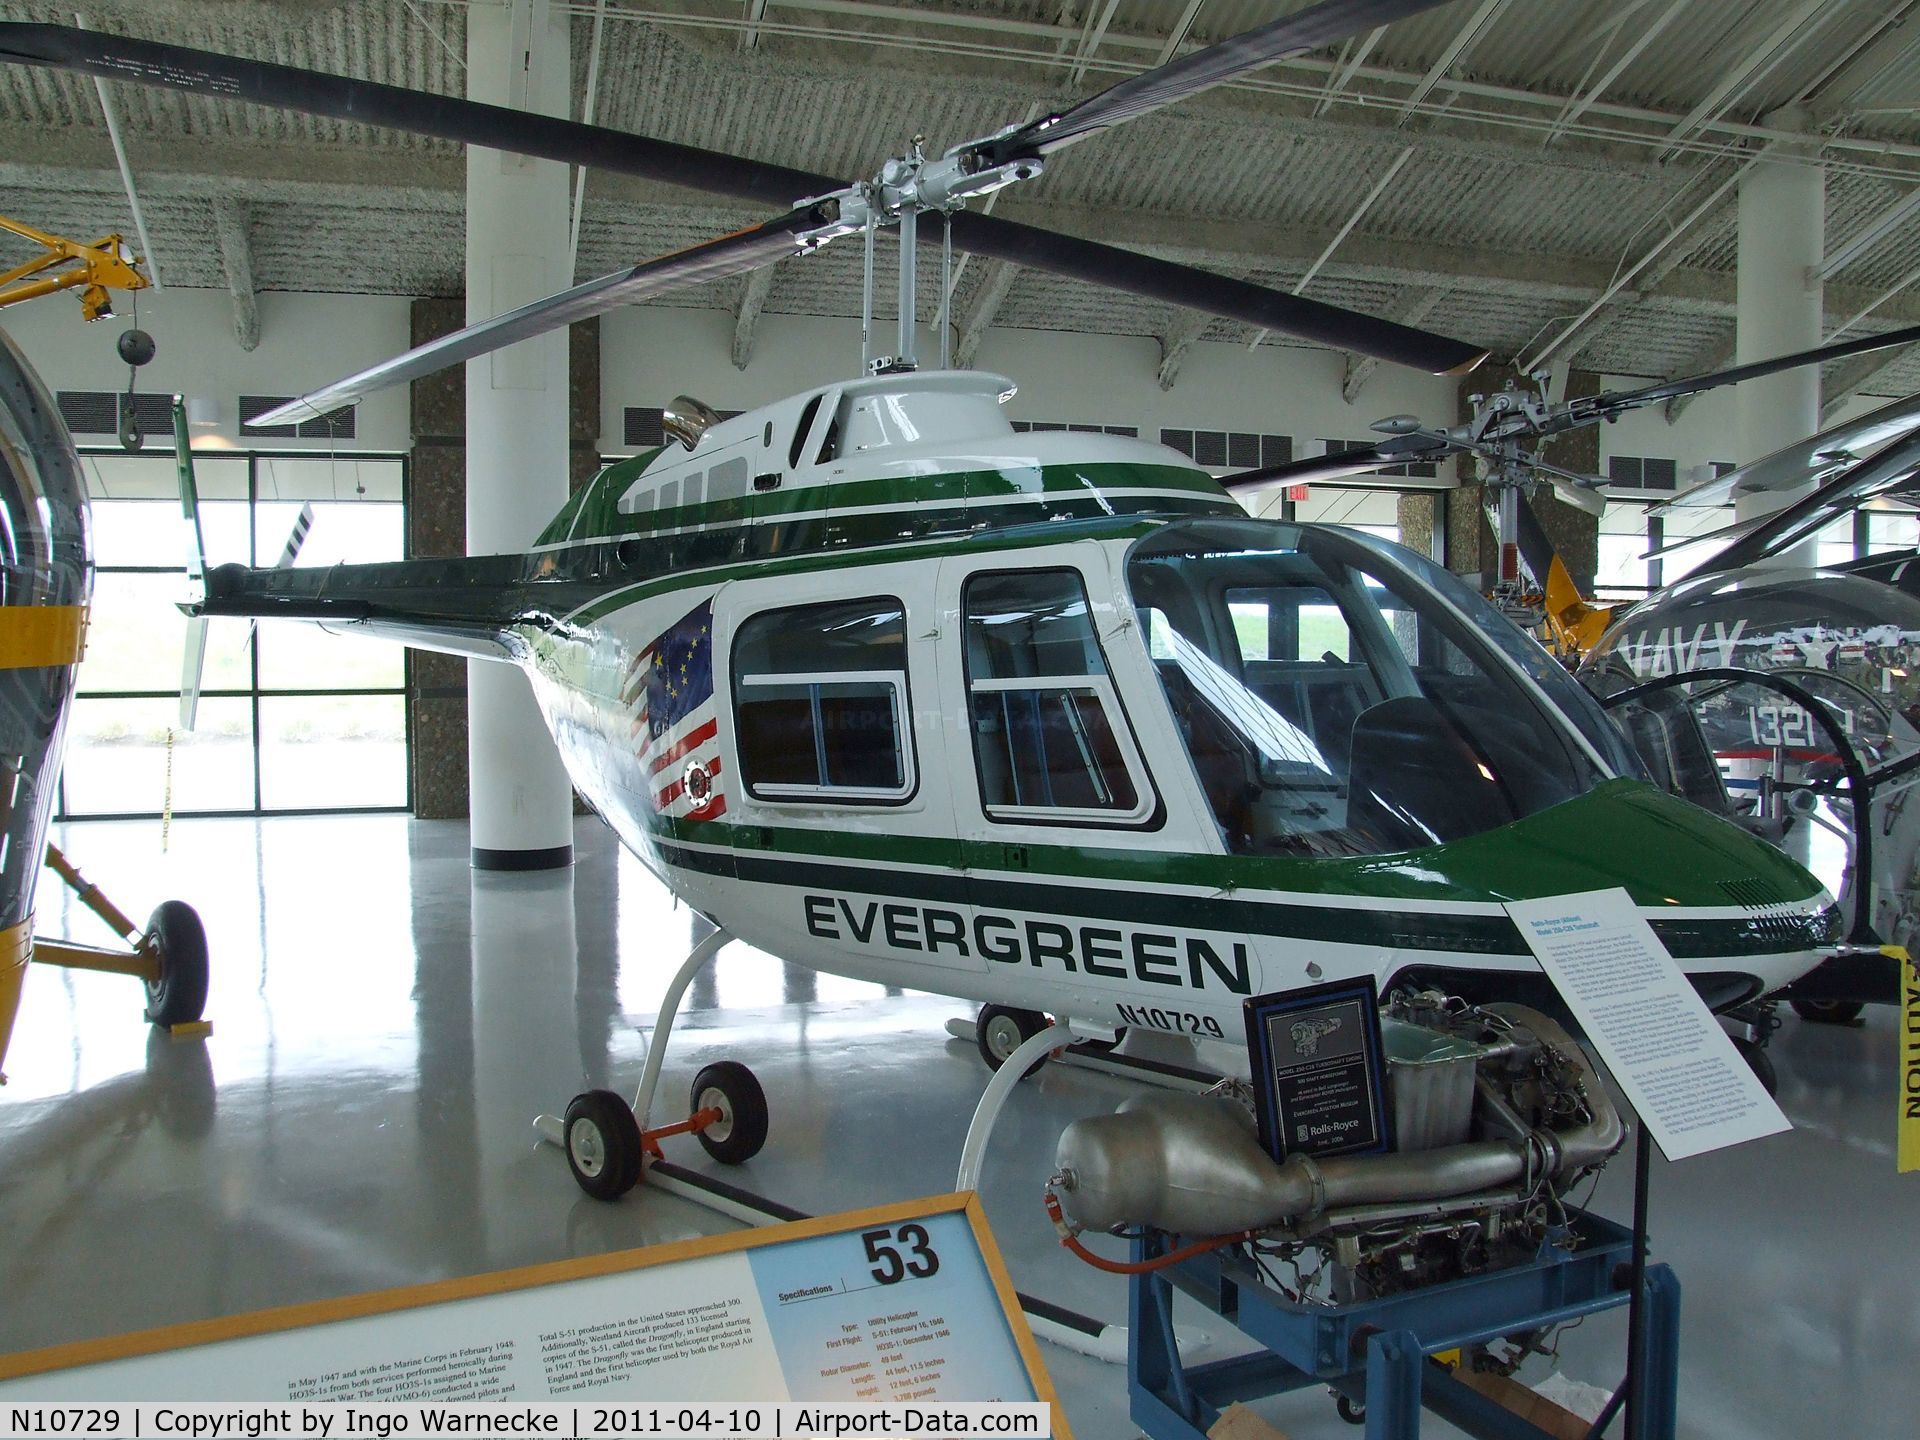 N10729, 1979 Bell 206B JetRanger III C/N 2876, Bell 206B JetRanger III at the Evergreen Aviation & Space Museum, McMinnville OR